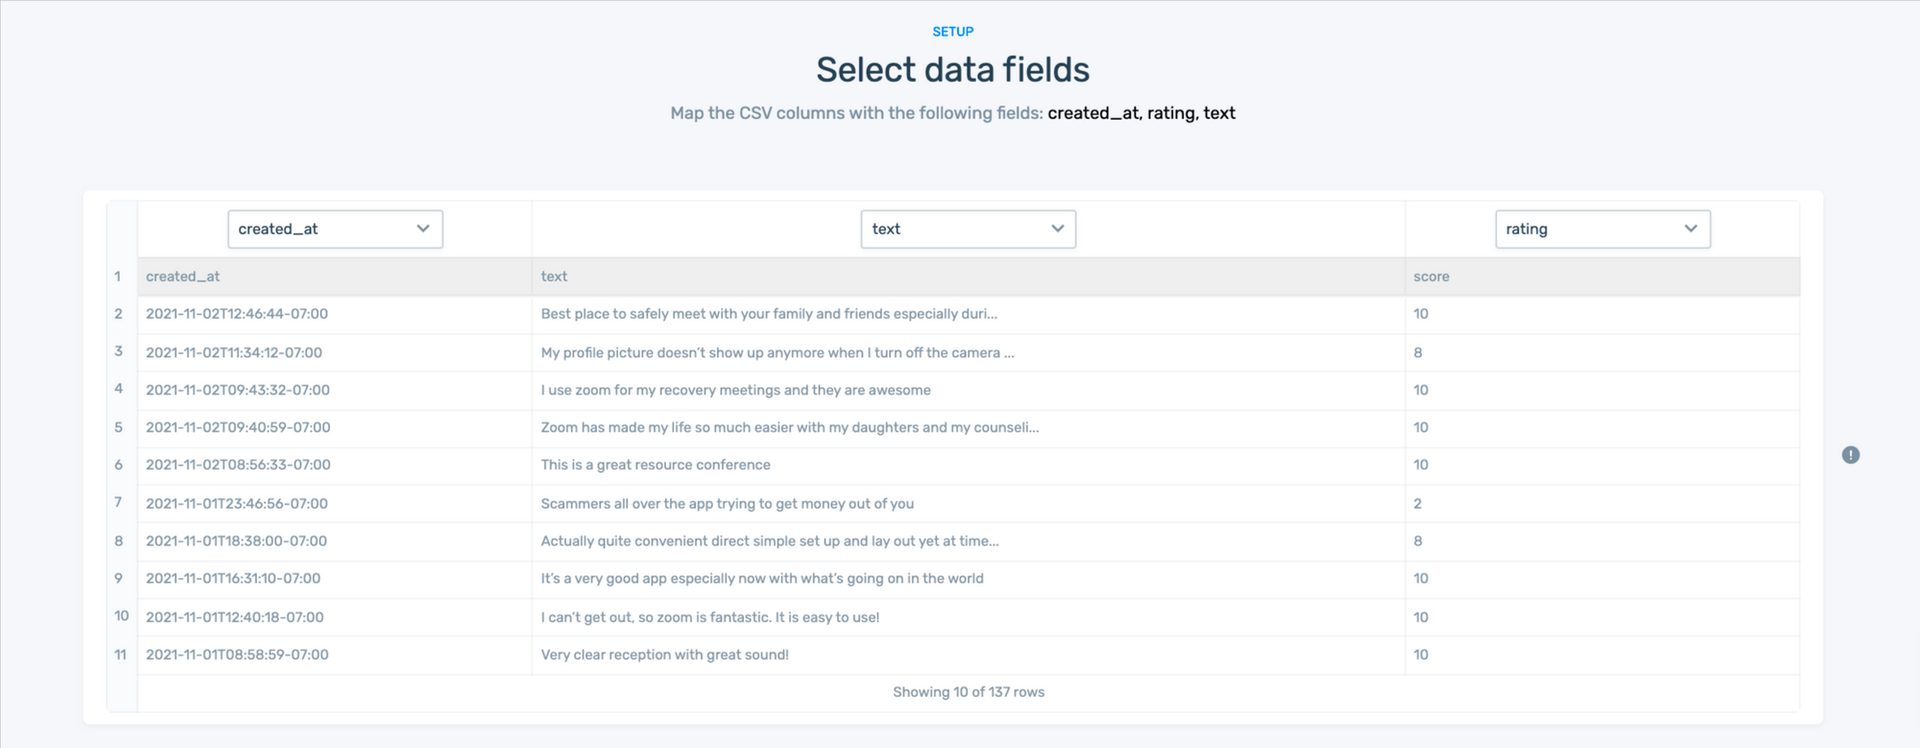 Select data fields. Rows and columns to be filled.